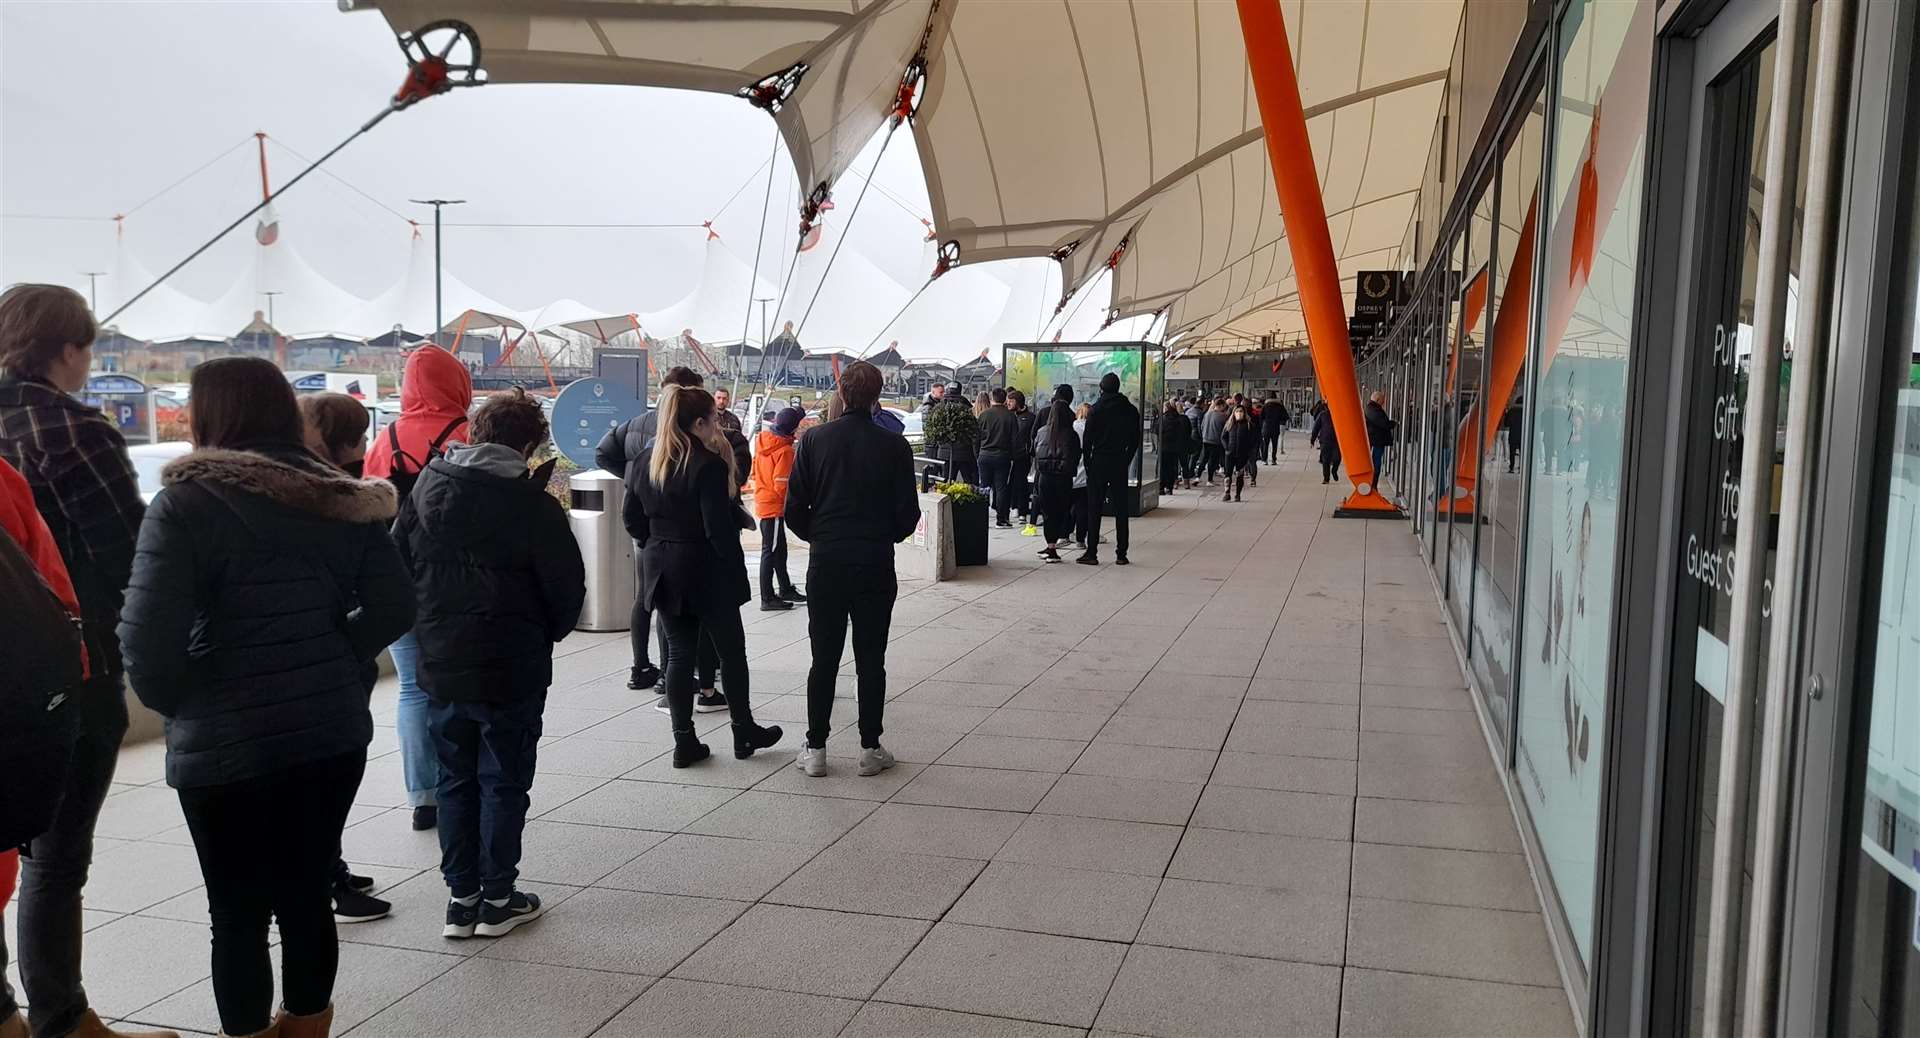 Even with a little bit of snow in the air, the Designer Outlet was busy first thing this morning